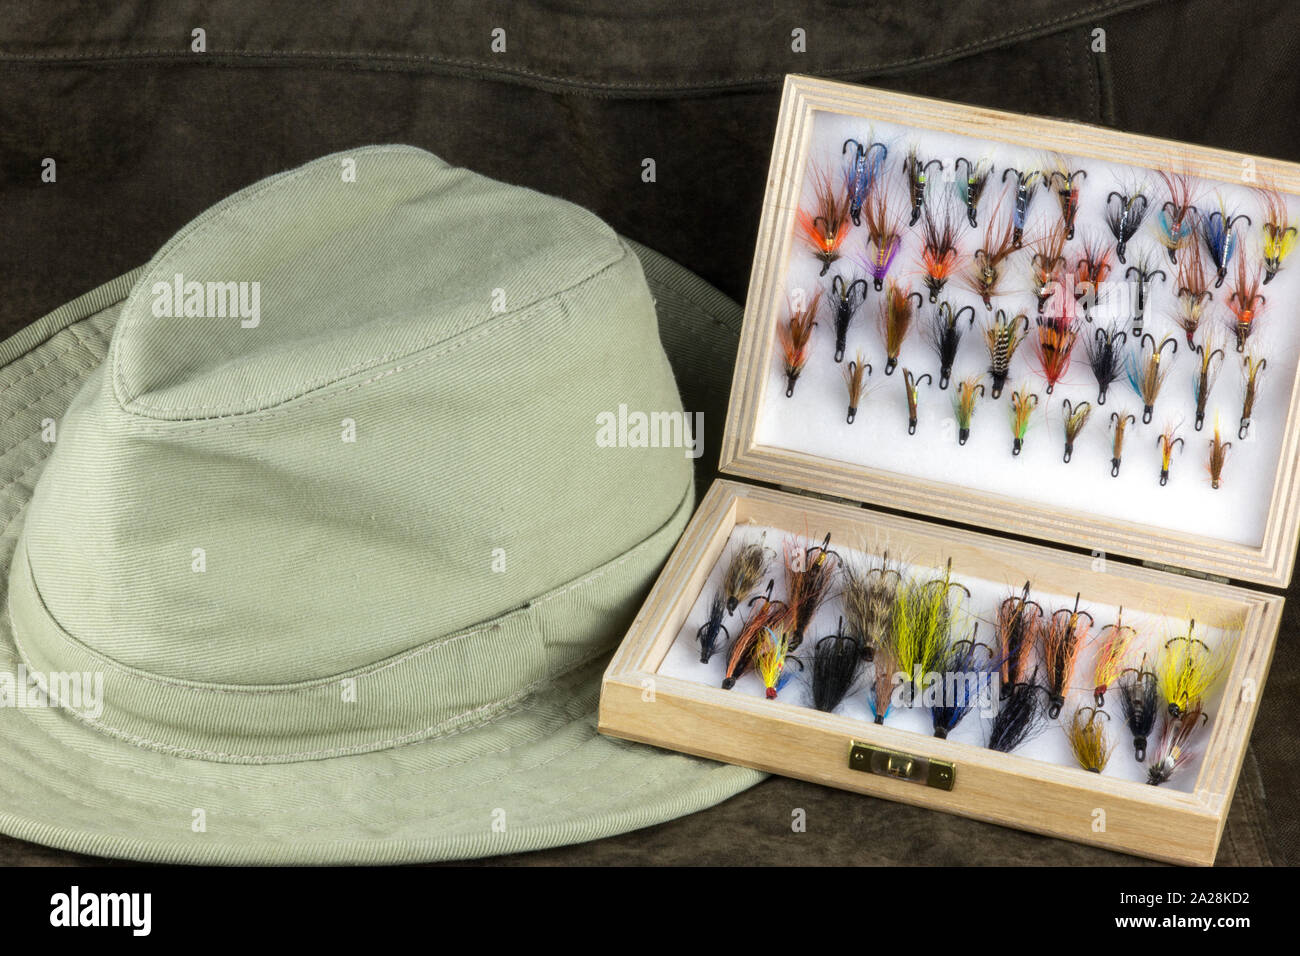 Bucket Hat With Flyfishing Flies Isolated On White Background